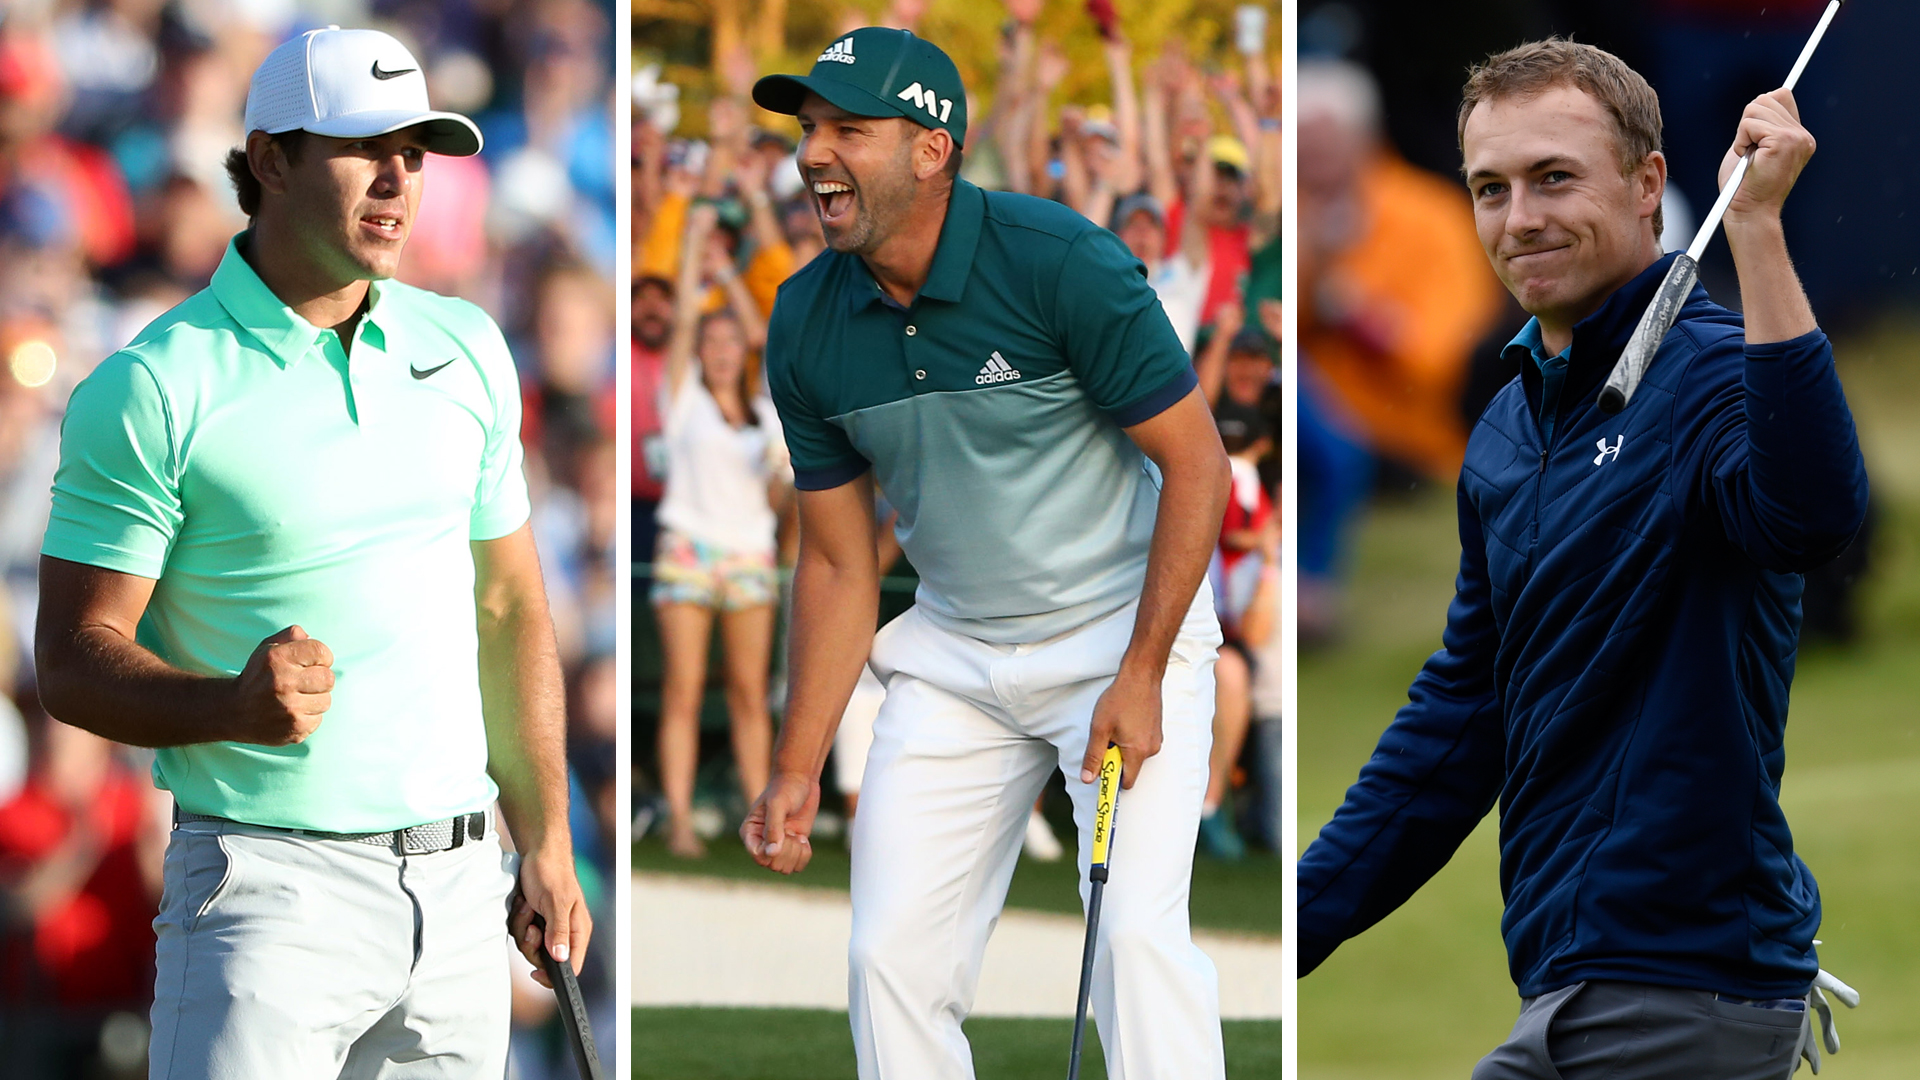 Here’s 5 groups we’ll be watching at the PGA Championship